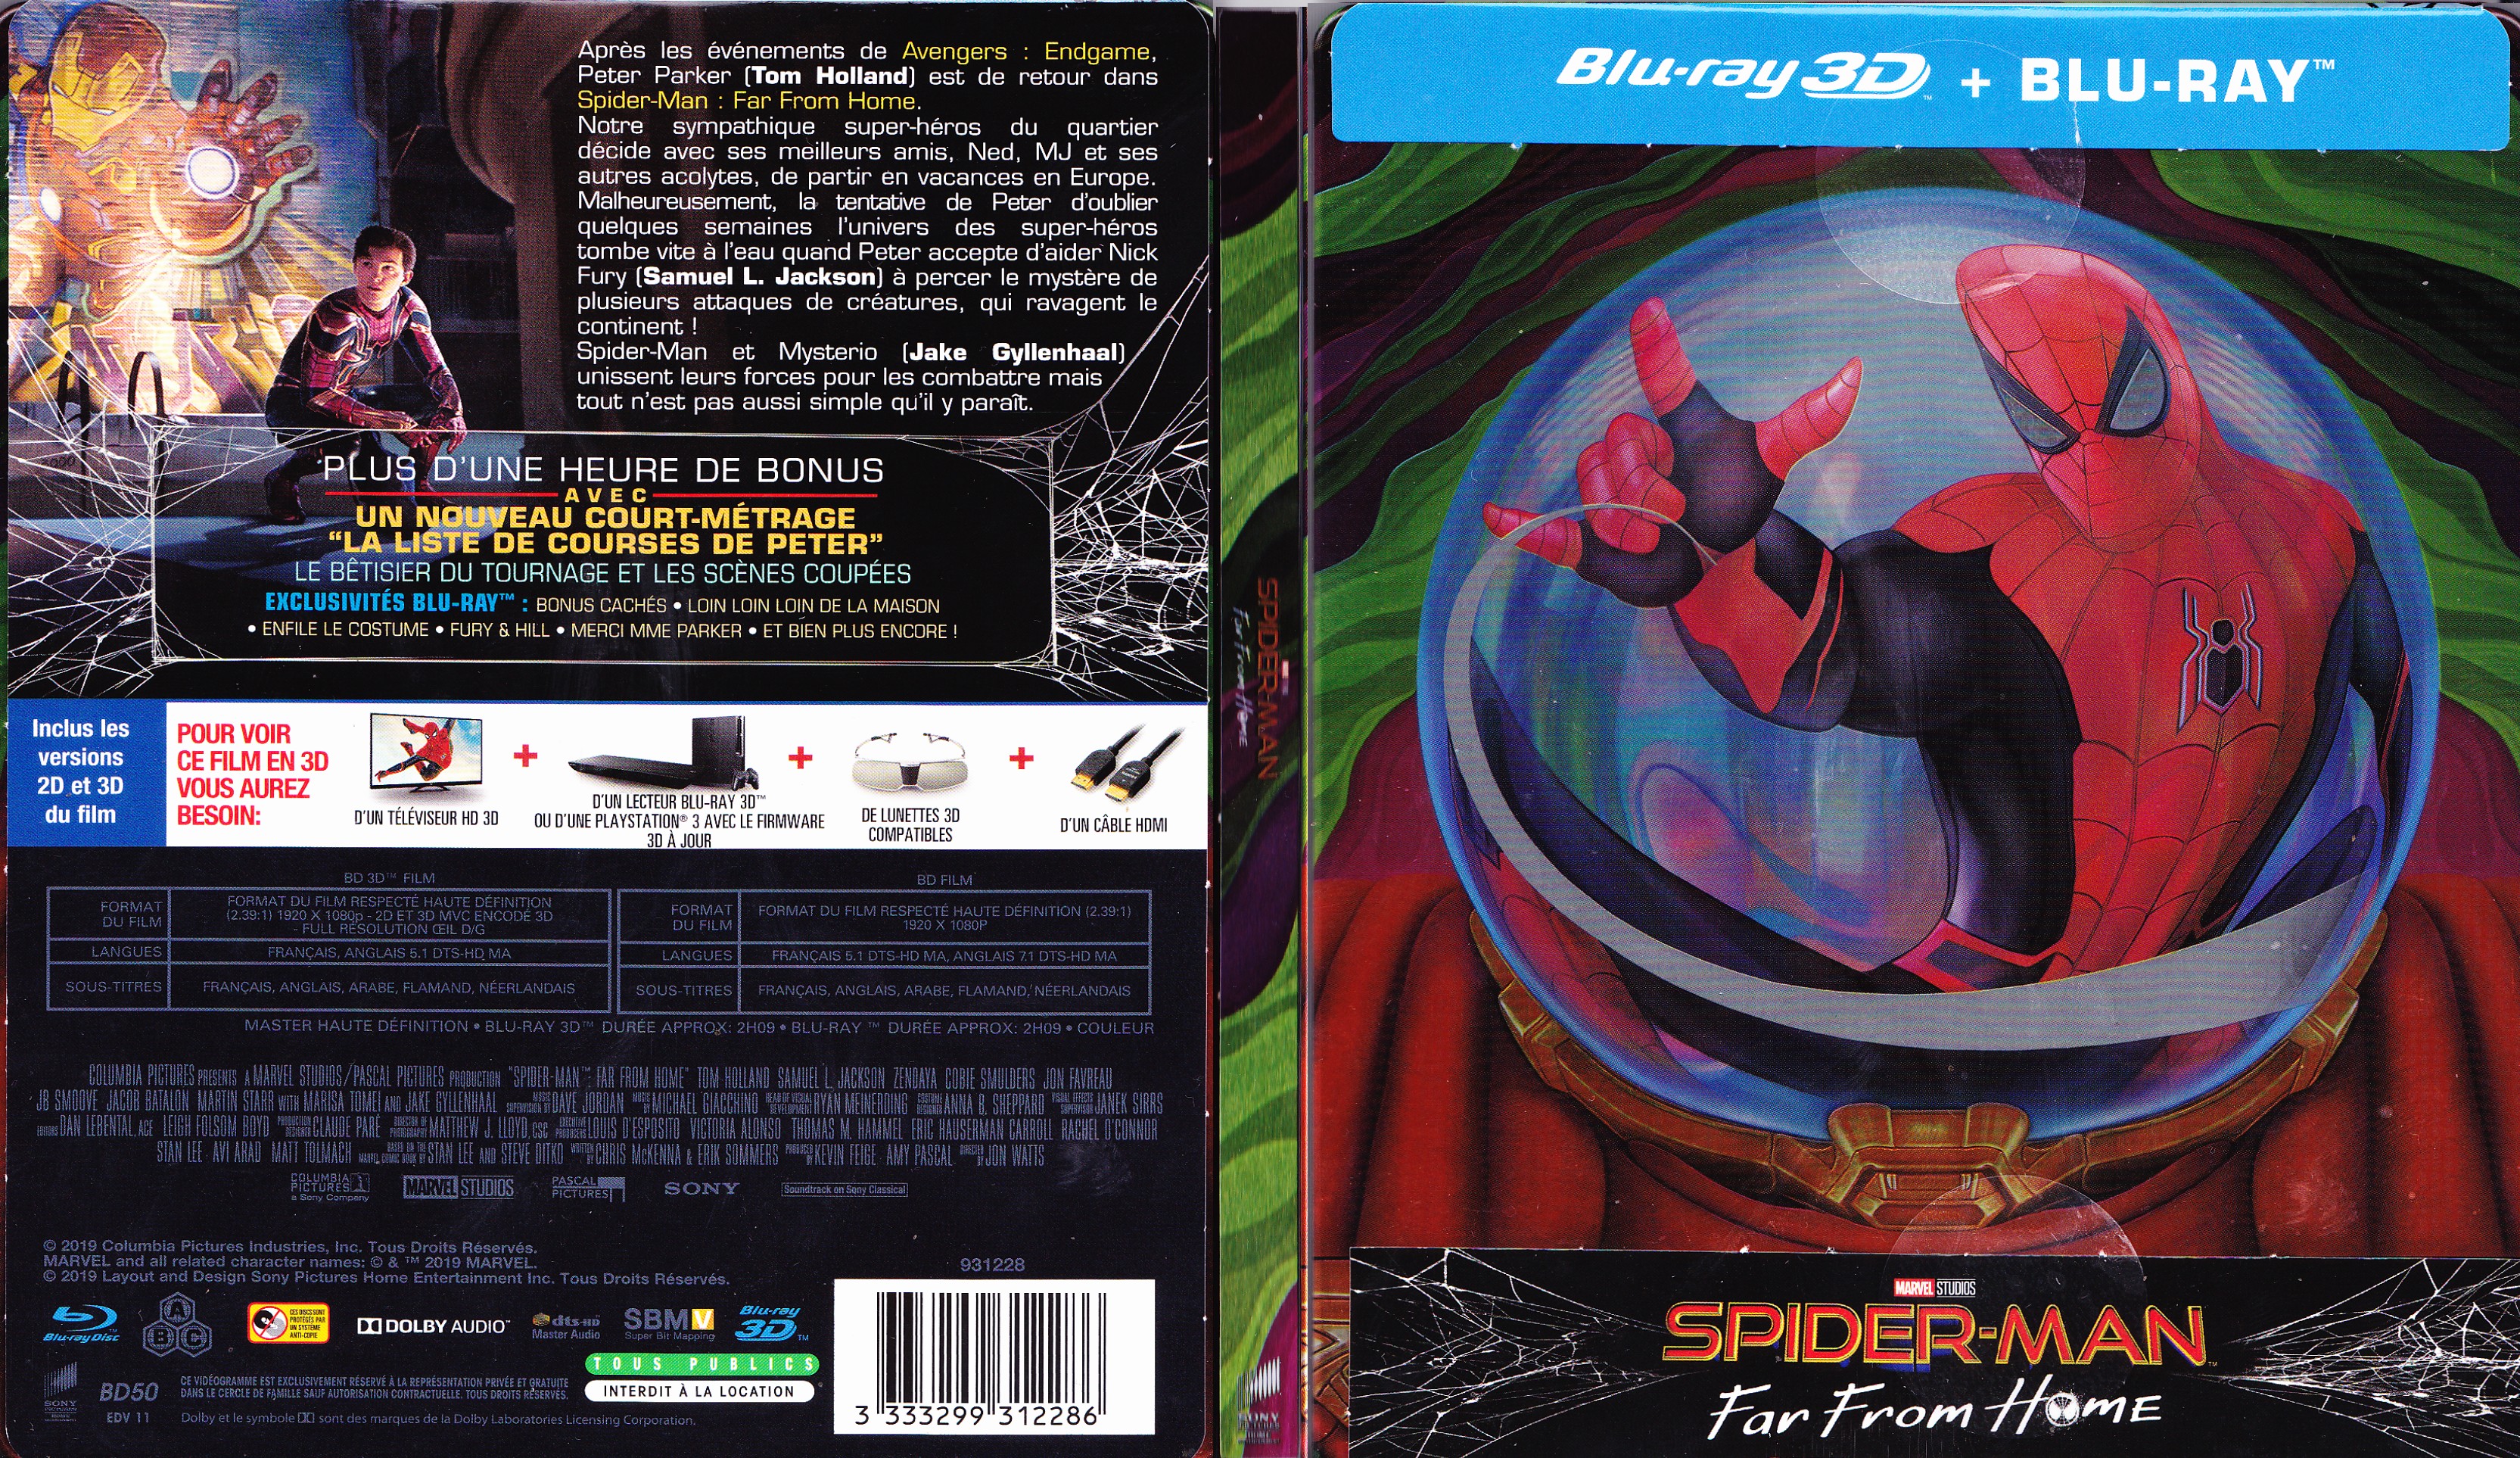 Jaquette DVD Spider-man Far from home (BLU-RAY) v2